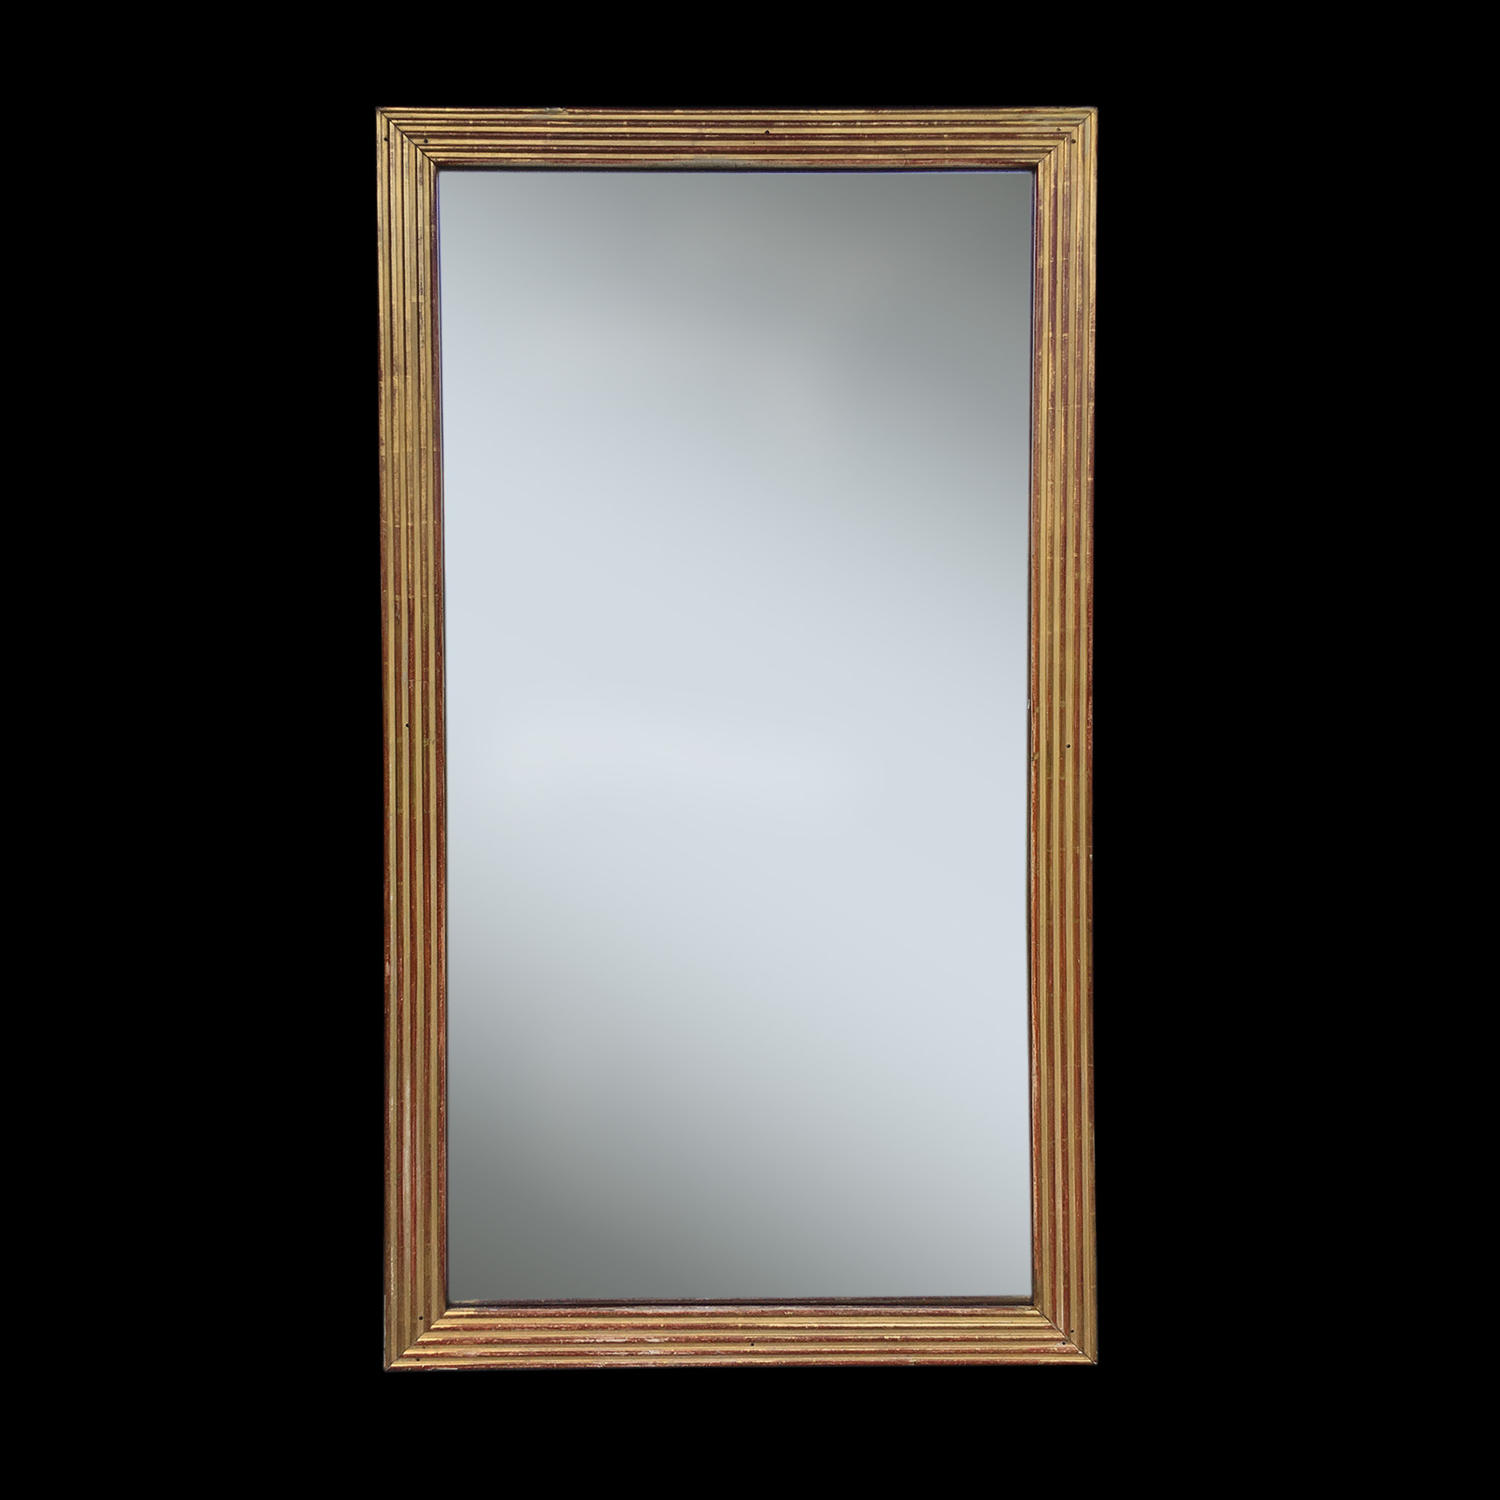 A FRENCH EMPIRE PERIOD REEDED GILTWOOD MIRROR